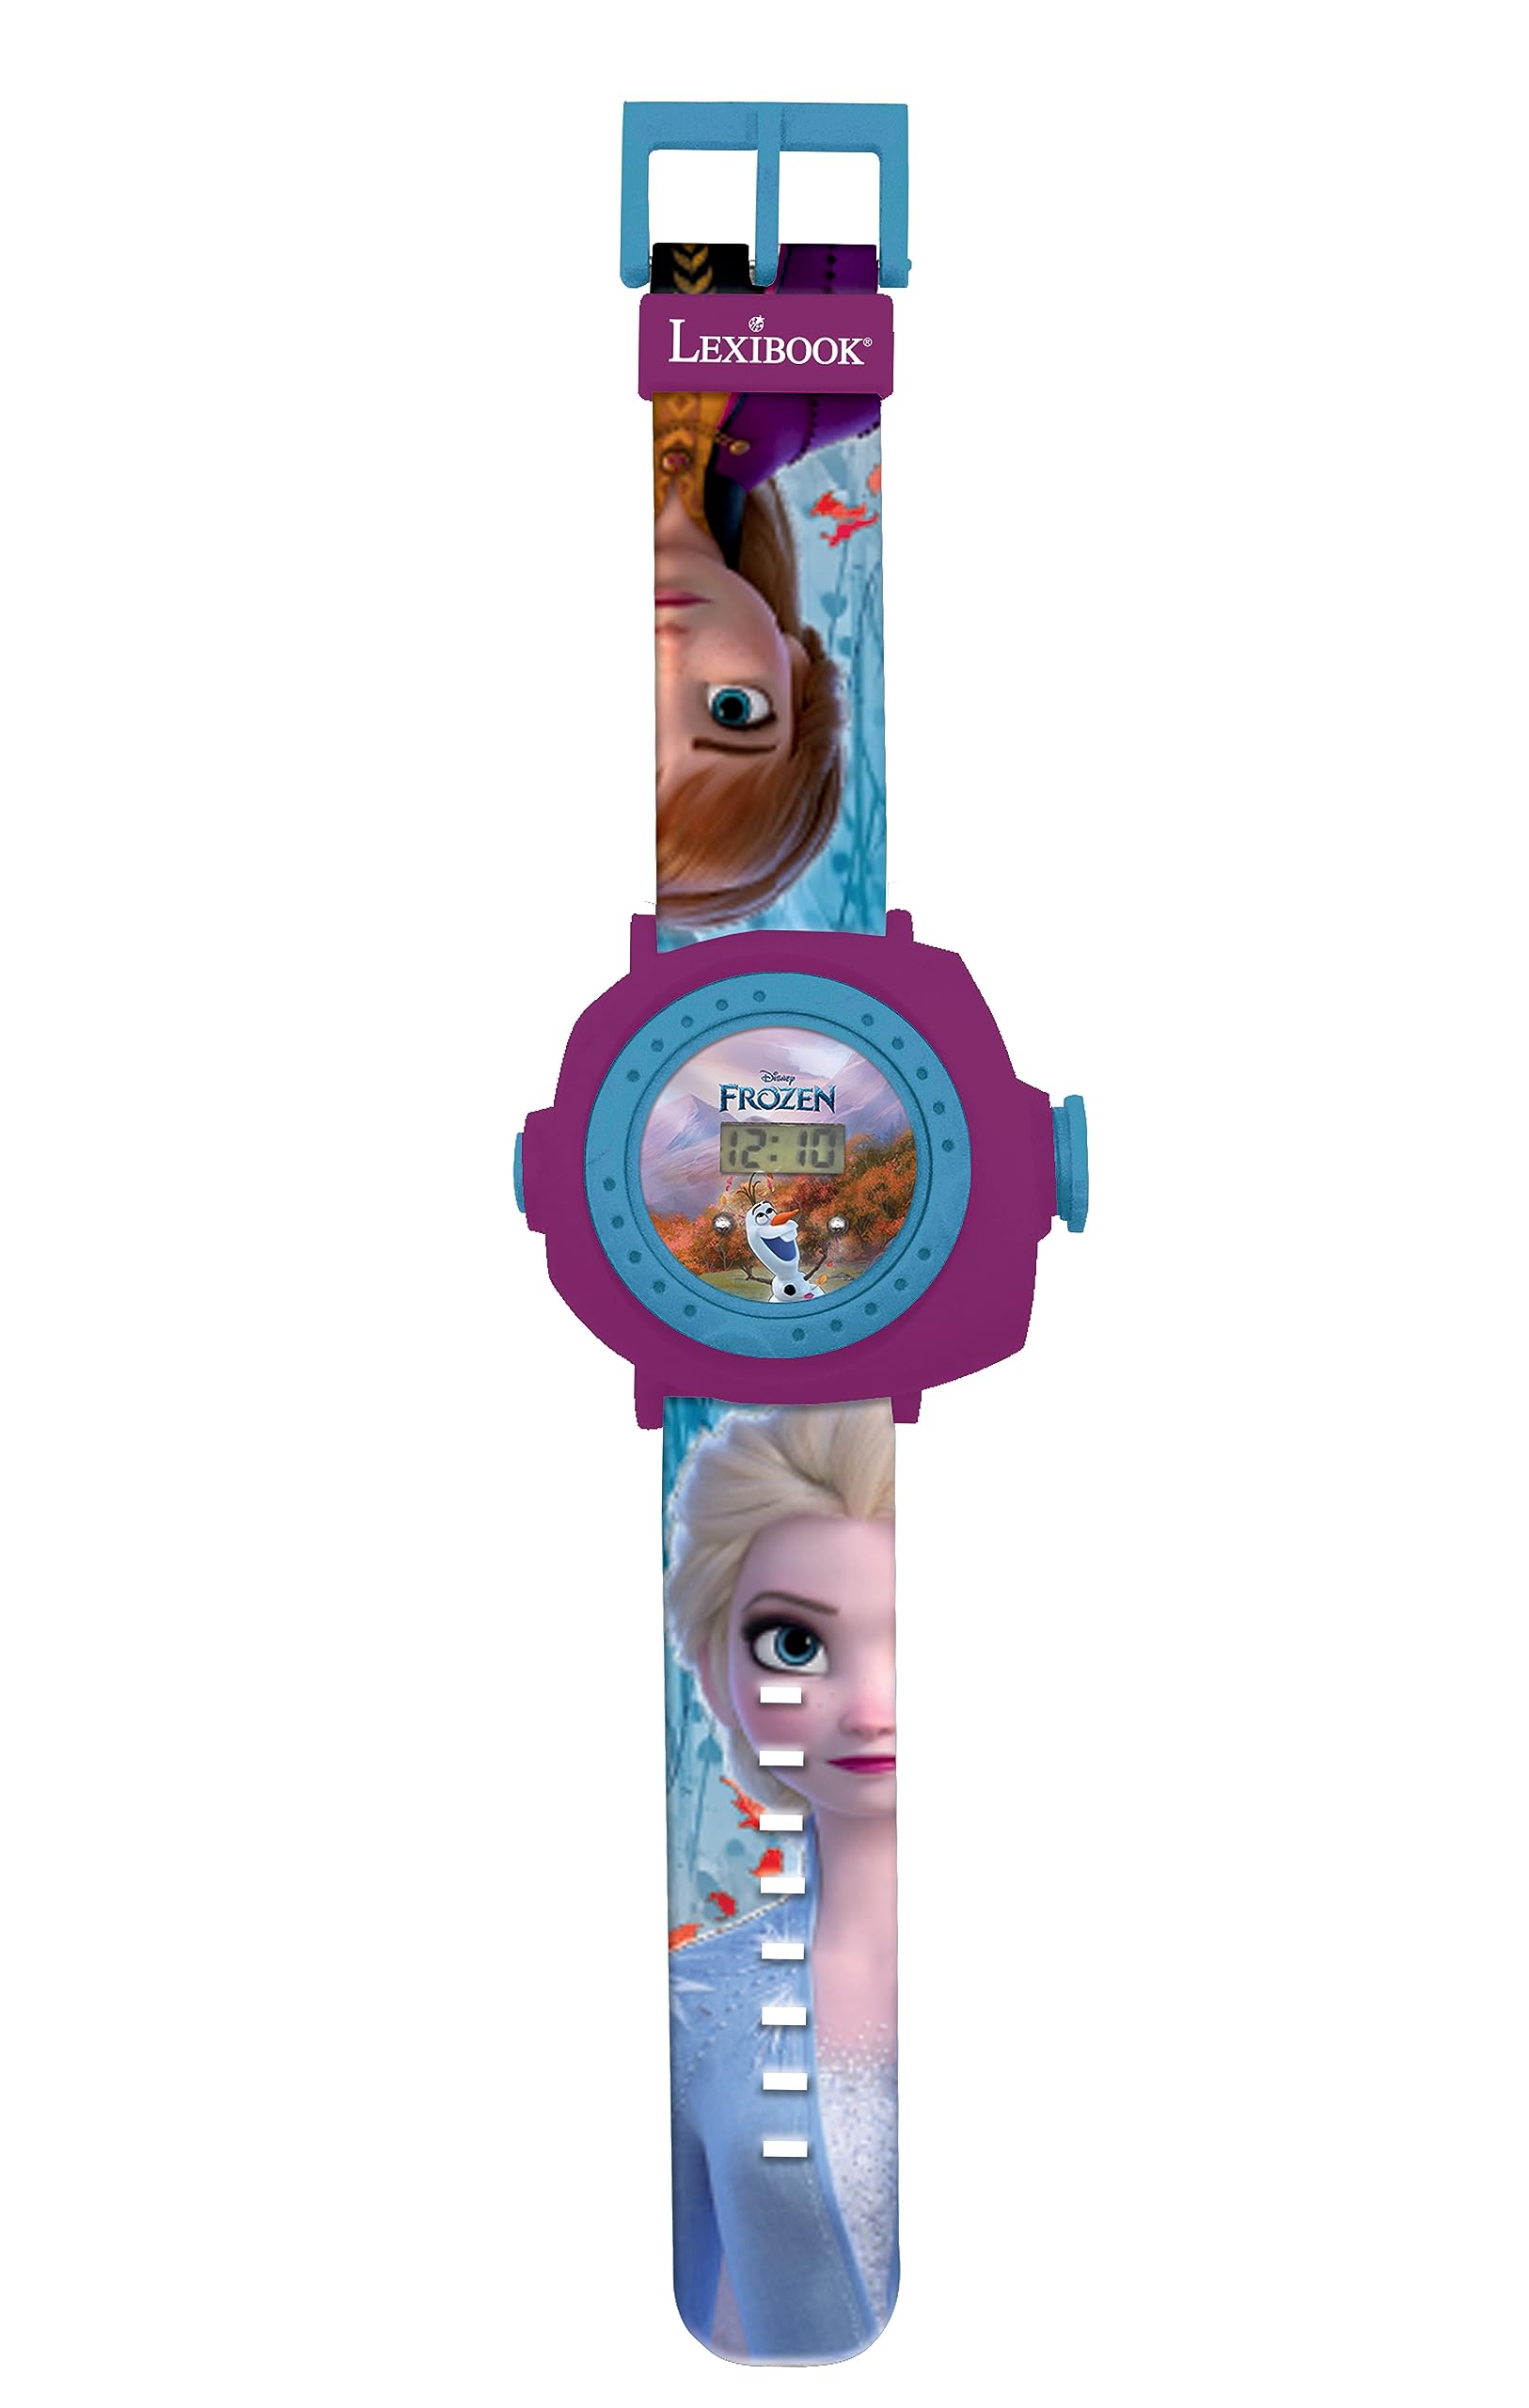 LEXIBOOK Frozen 2 Adjustable Projection Watch Digital Screen – 20 Images of Elsa, Anna and Olaf-for Children/Girls-Blue and Purple (Model: DMW050FZ), Berry